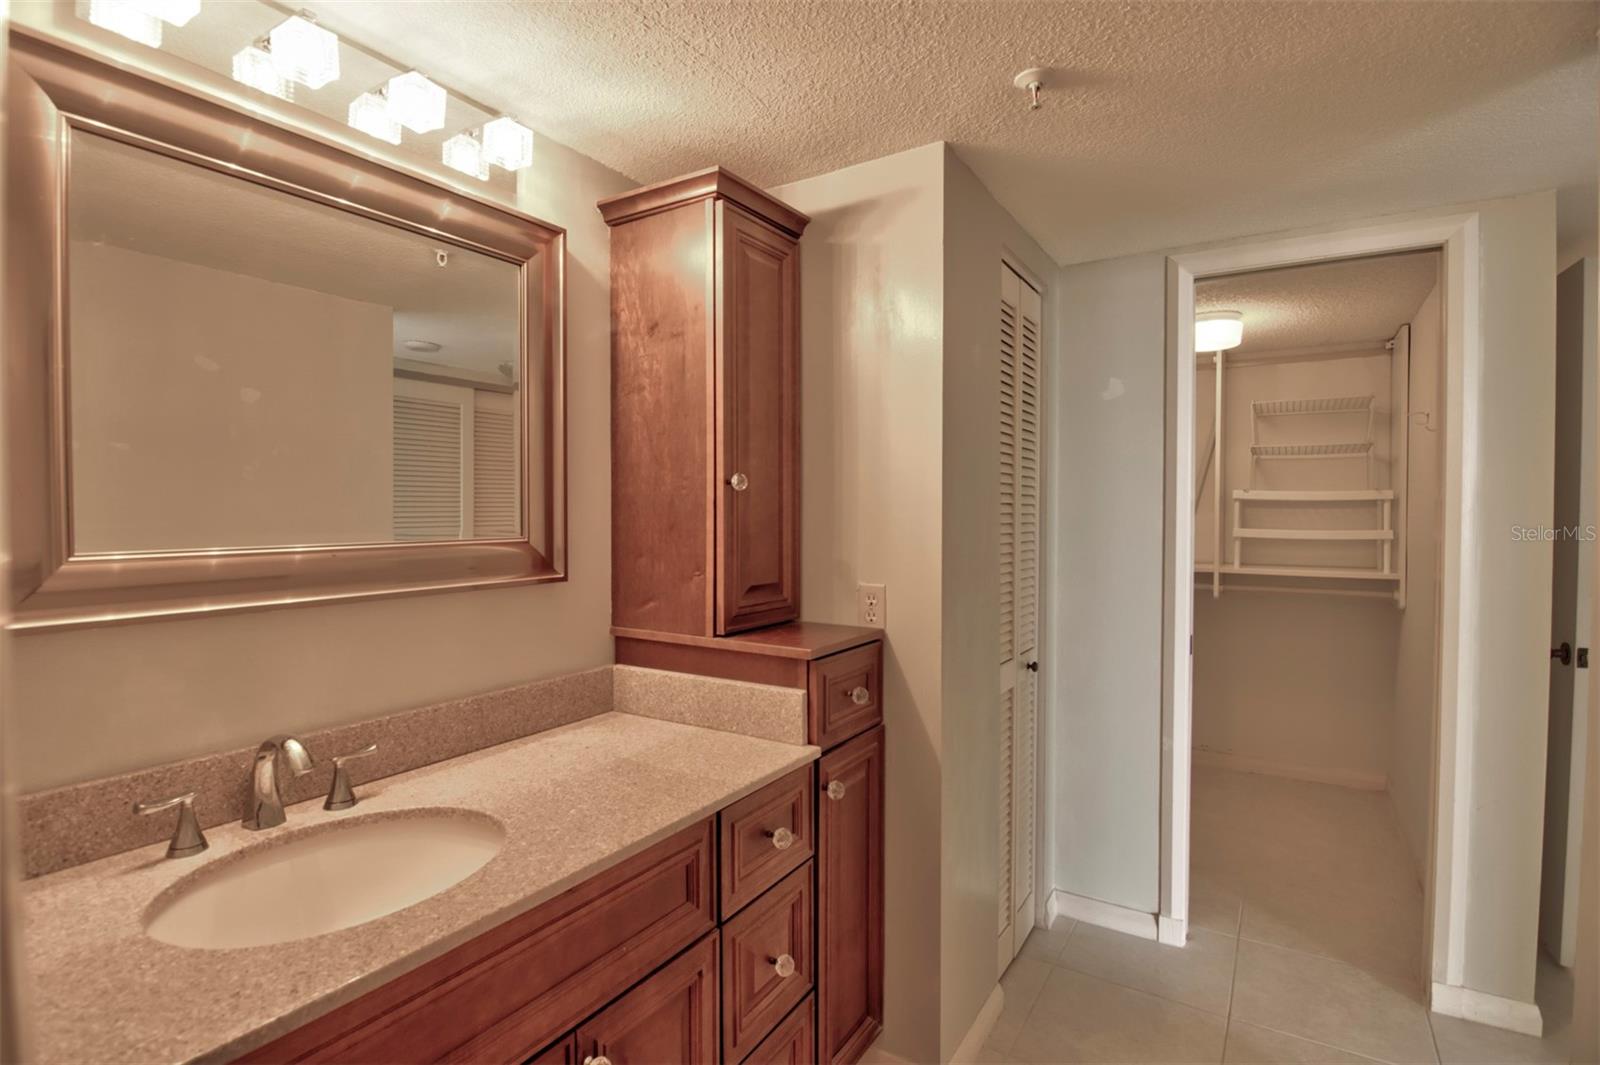 Primary Bathroom with walk-in closet